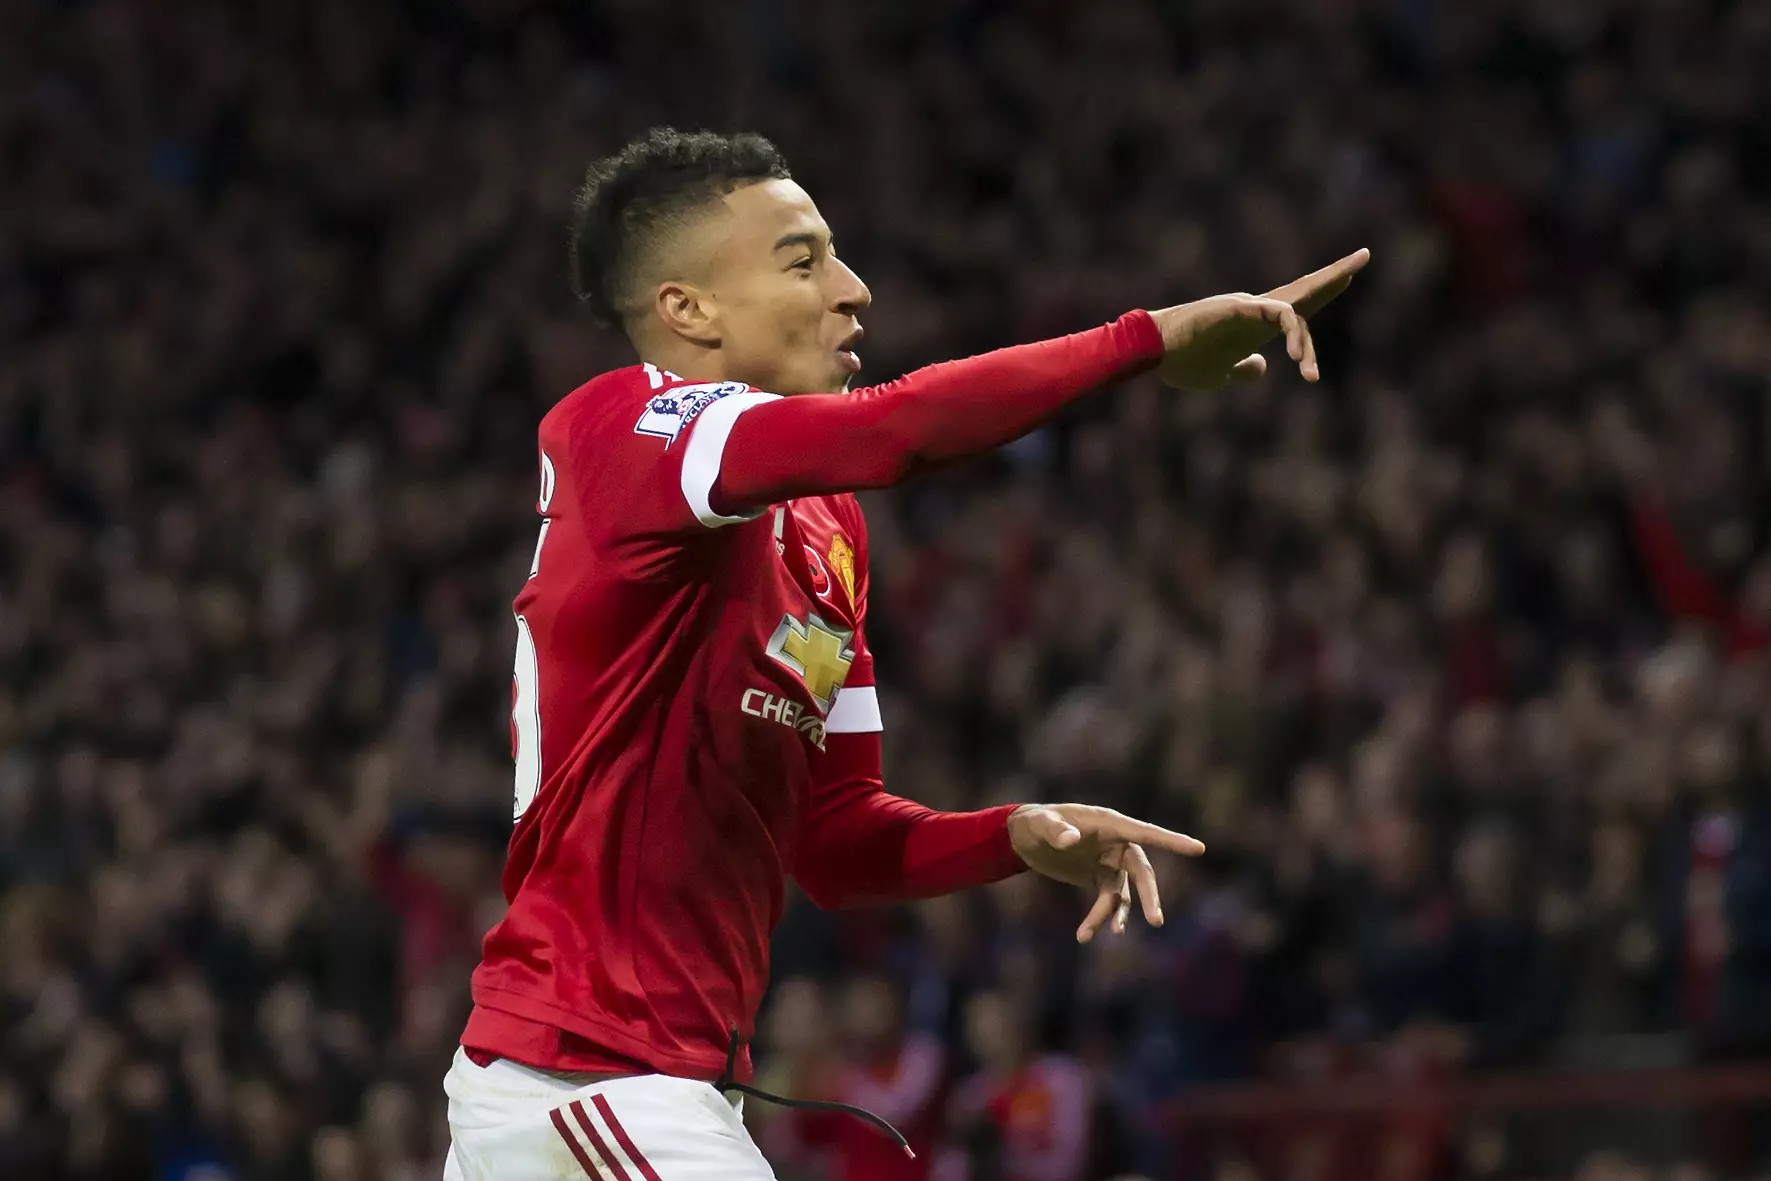 Jesse Lingard Responds To Criticism Following Video With Paul Pogba